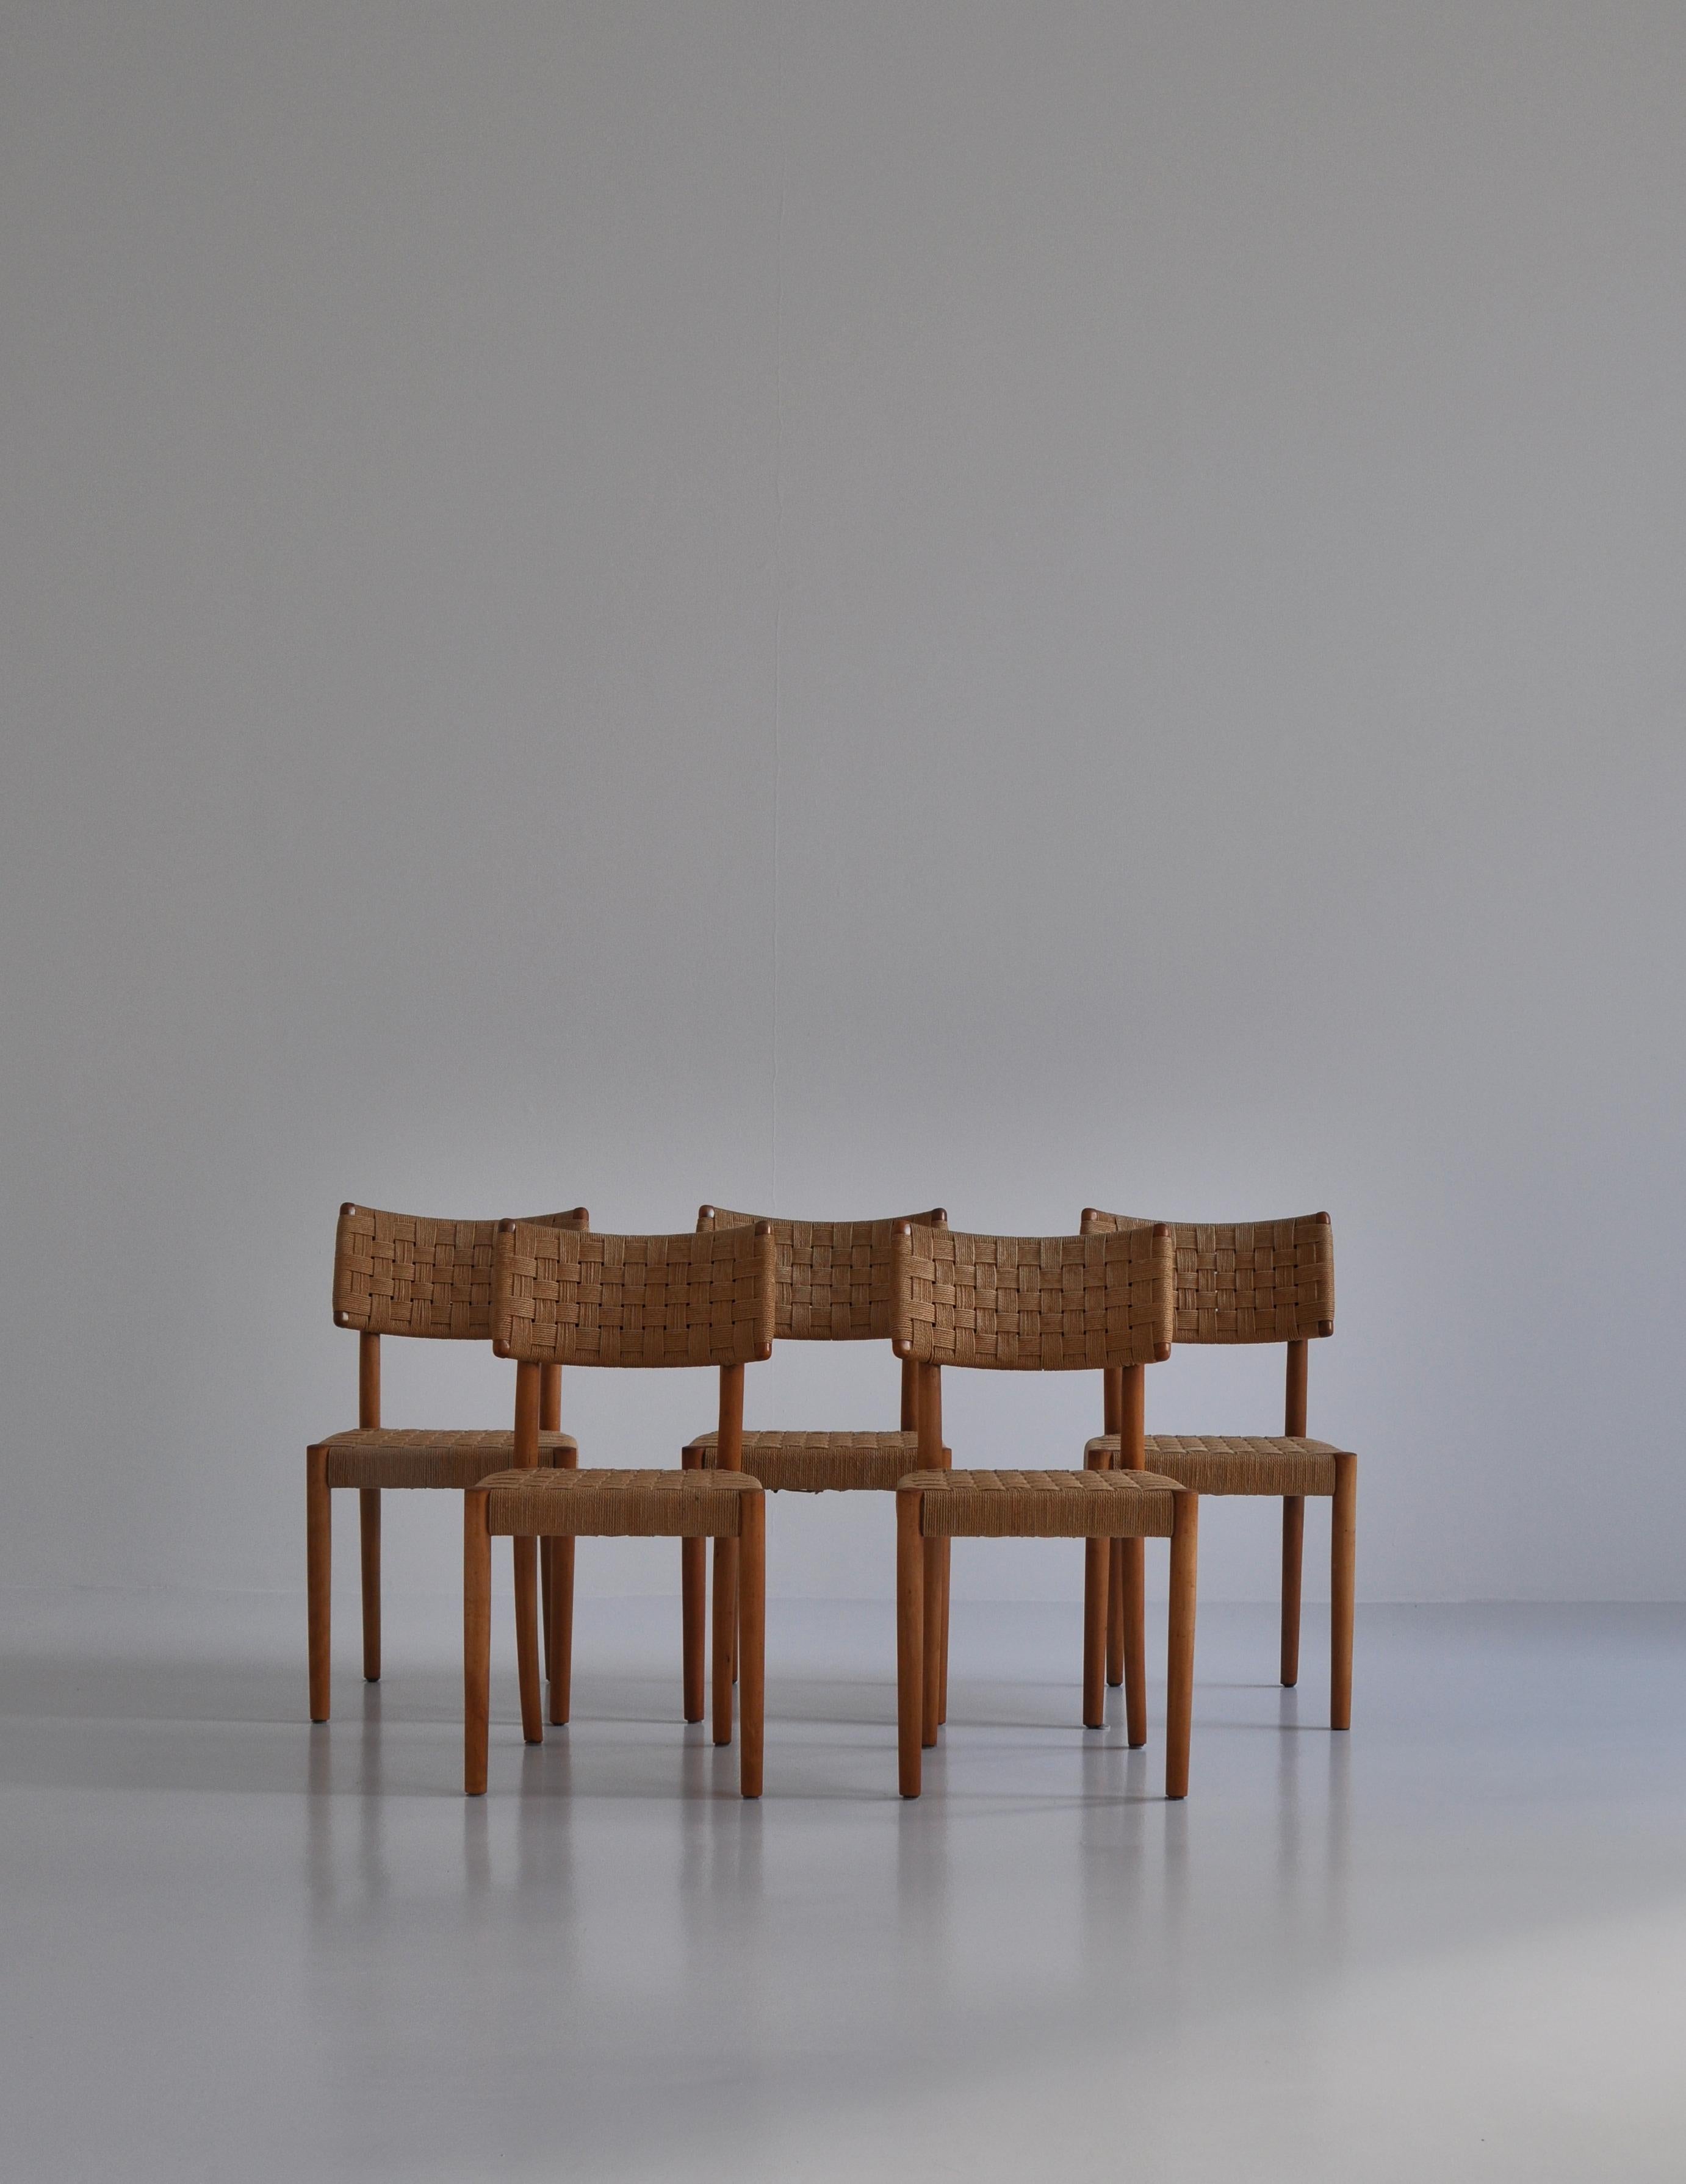 Rare and important set of 5 dining / side chairs made in the 1930s at Fritz Hansen, Denmark. Wonderful example of the early functionalism that dominated Danish furniture design in the beginning of the Danish modern era. Karl Schröder was working for